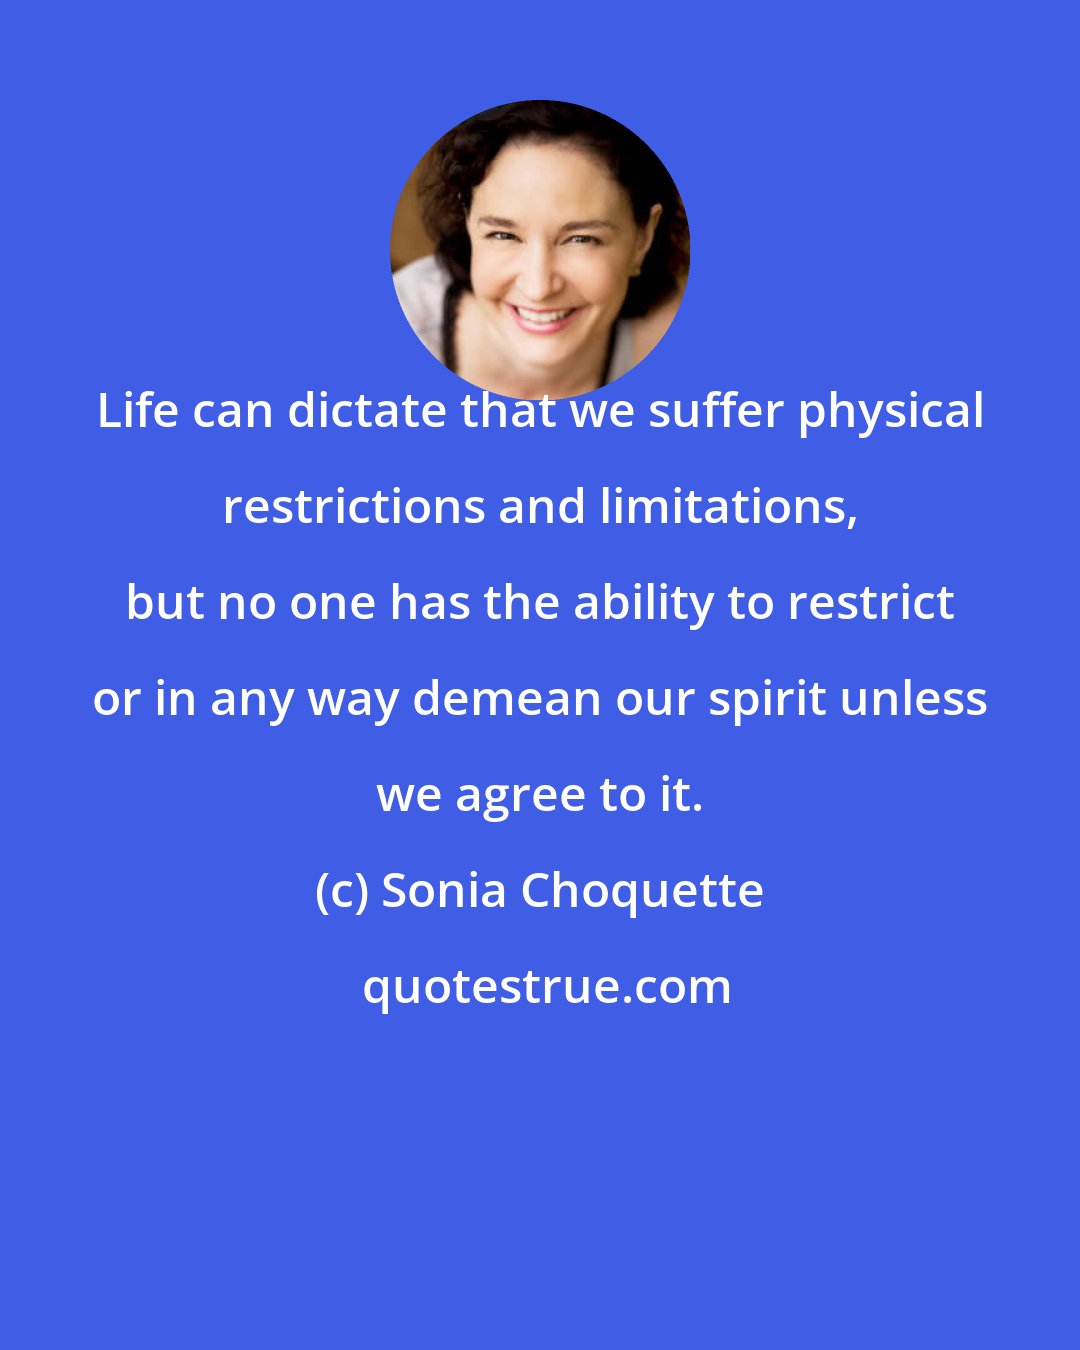 Sonia Choquette: Life can dictate that we suffer physical restrictions and limitations, but no one has the ability to restrict or in any way demean our spirit unless we agree to it.